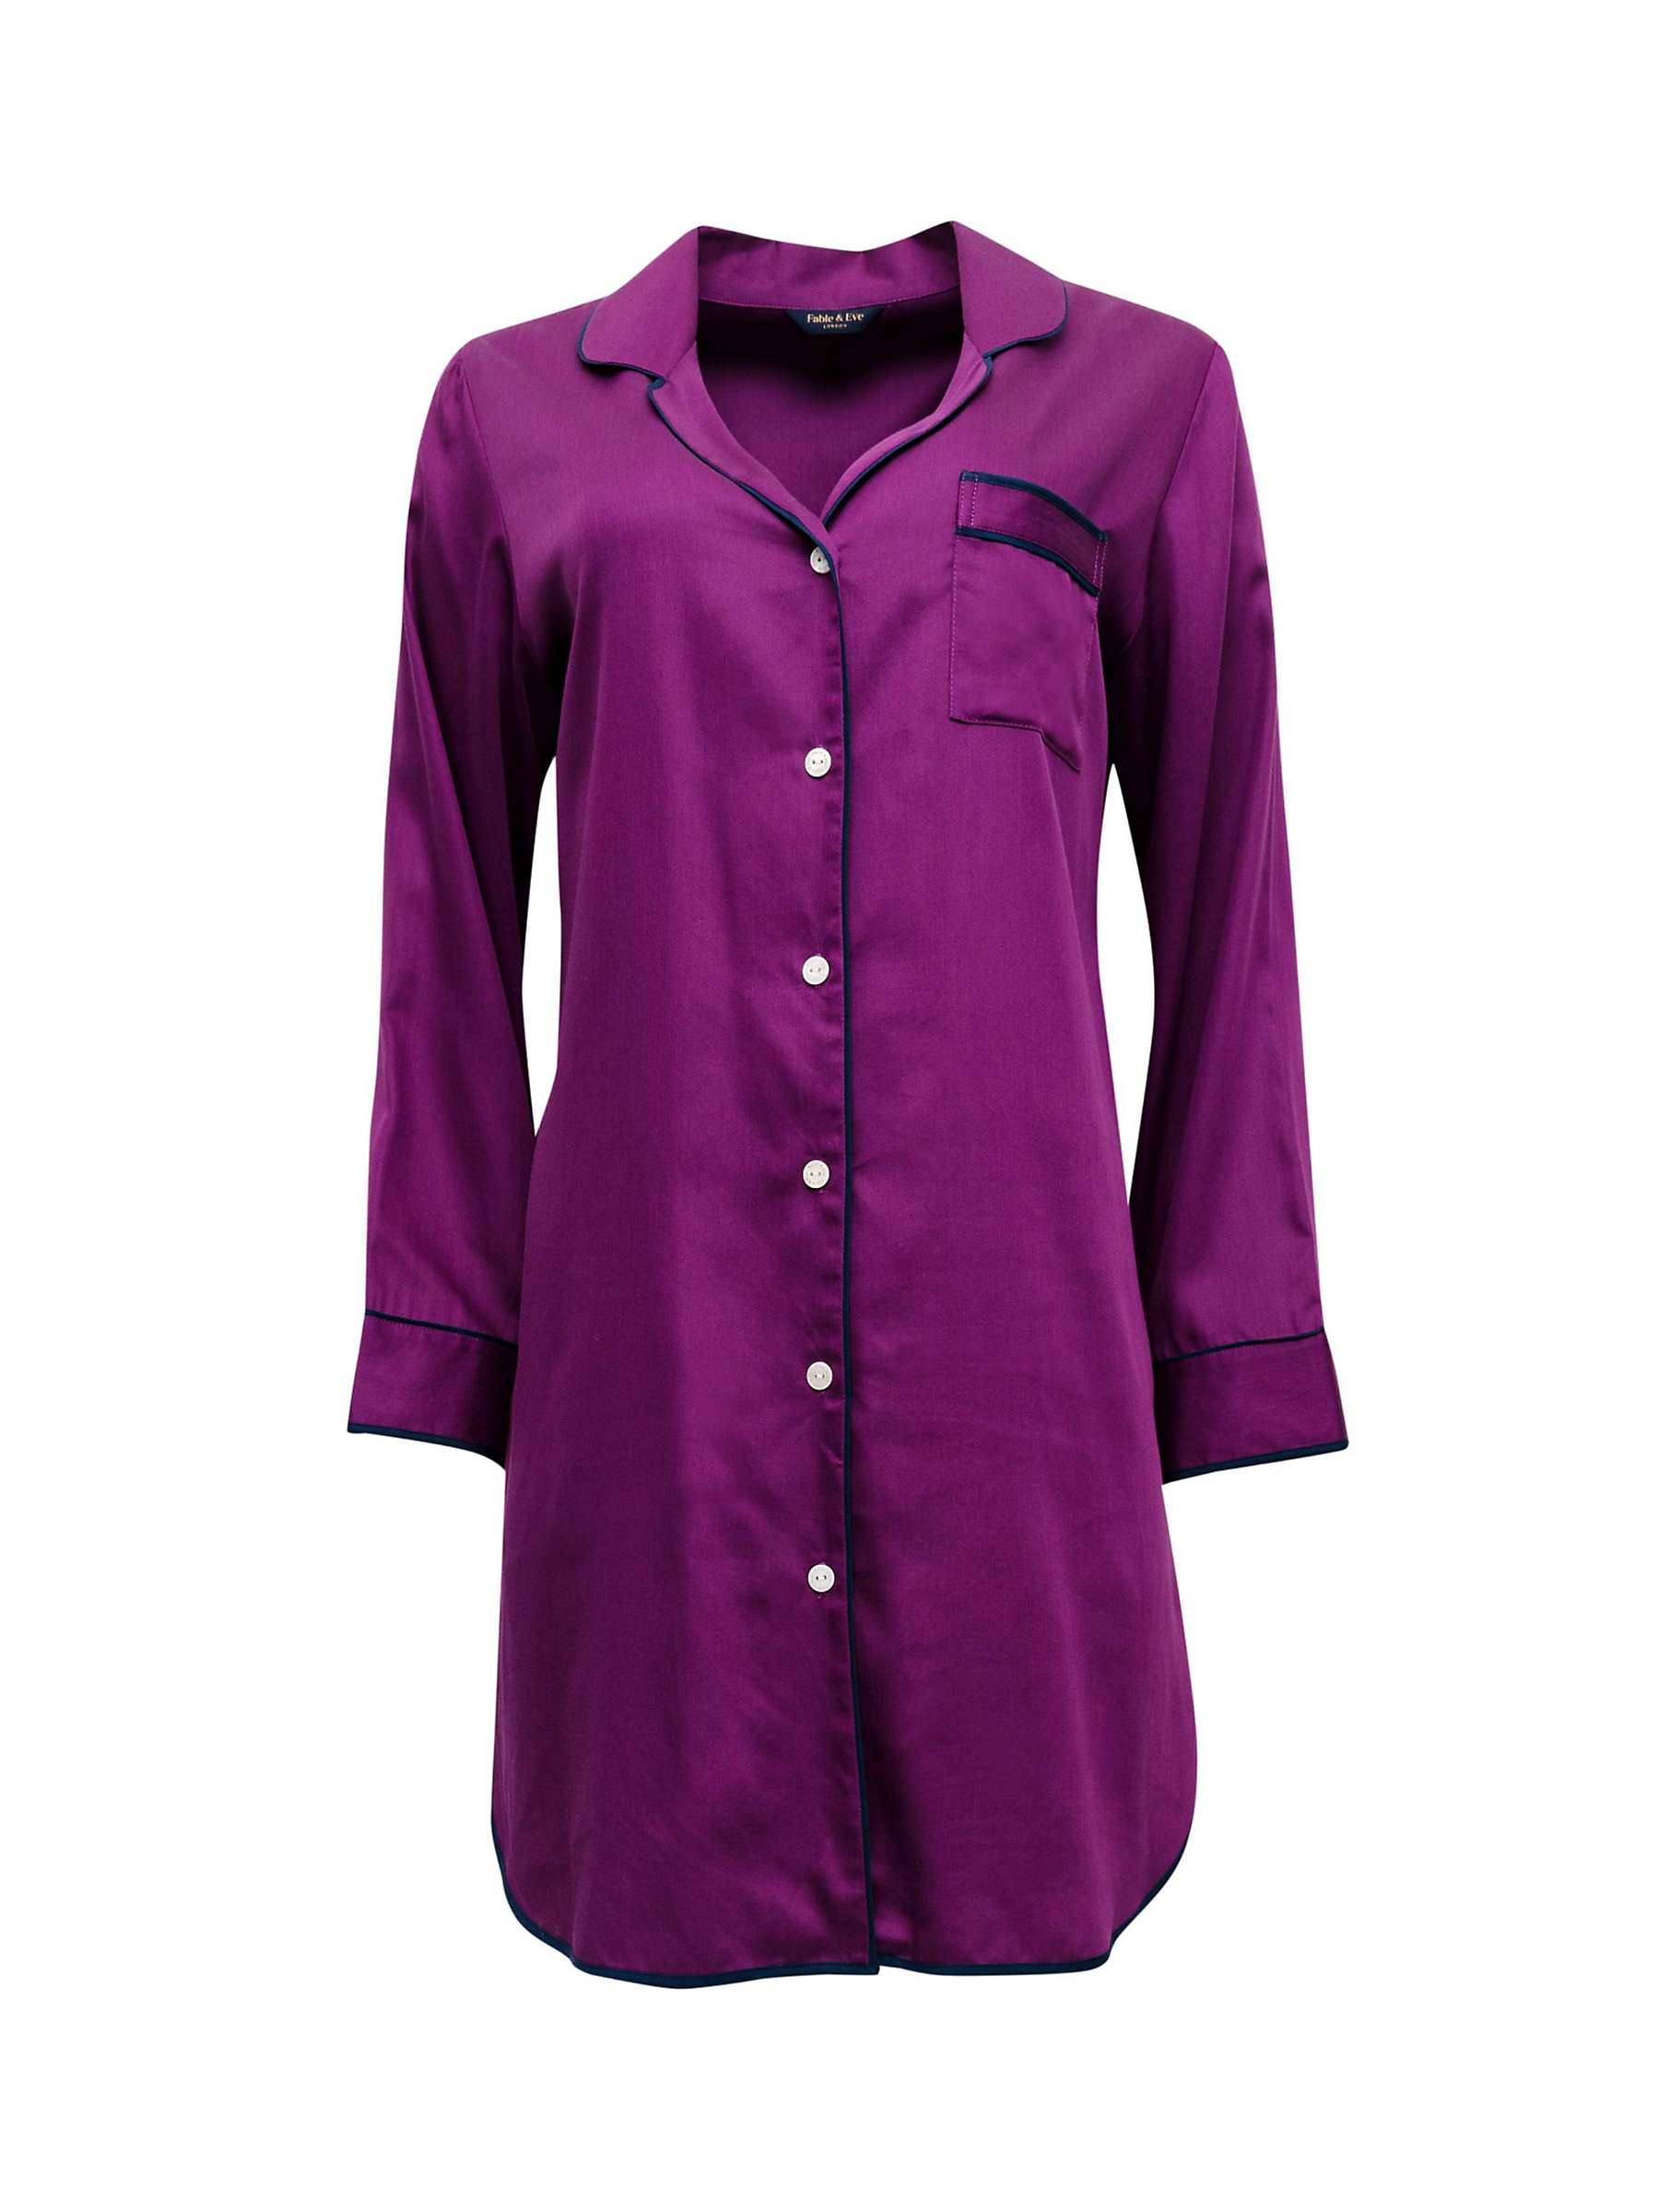 Buy Fable & Eve Southbank Solid Long Sleeve Nightshirt, Magenta Online at johnlewis.com